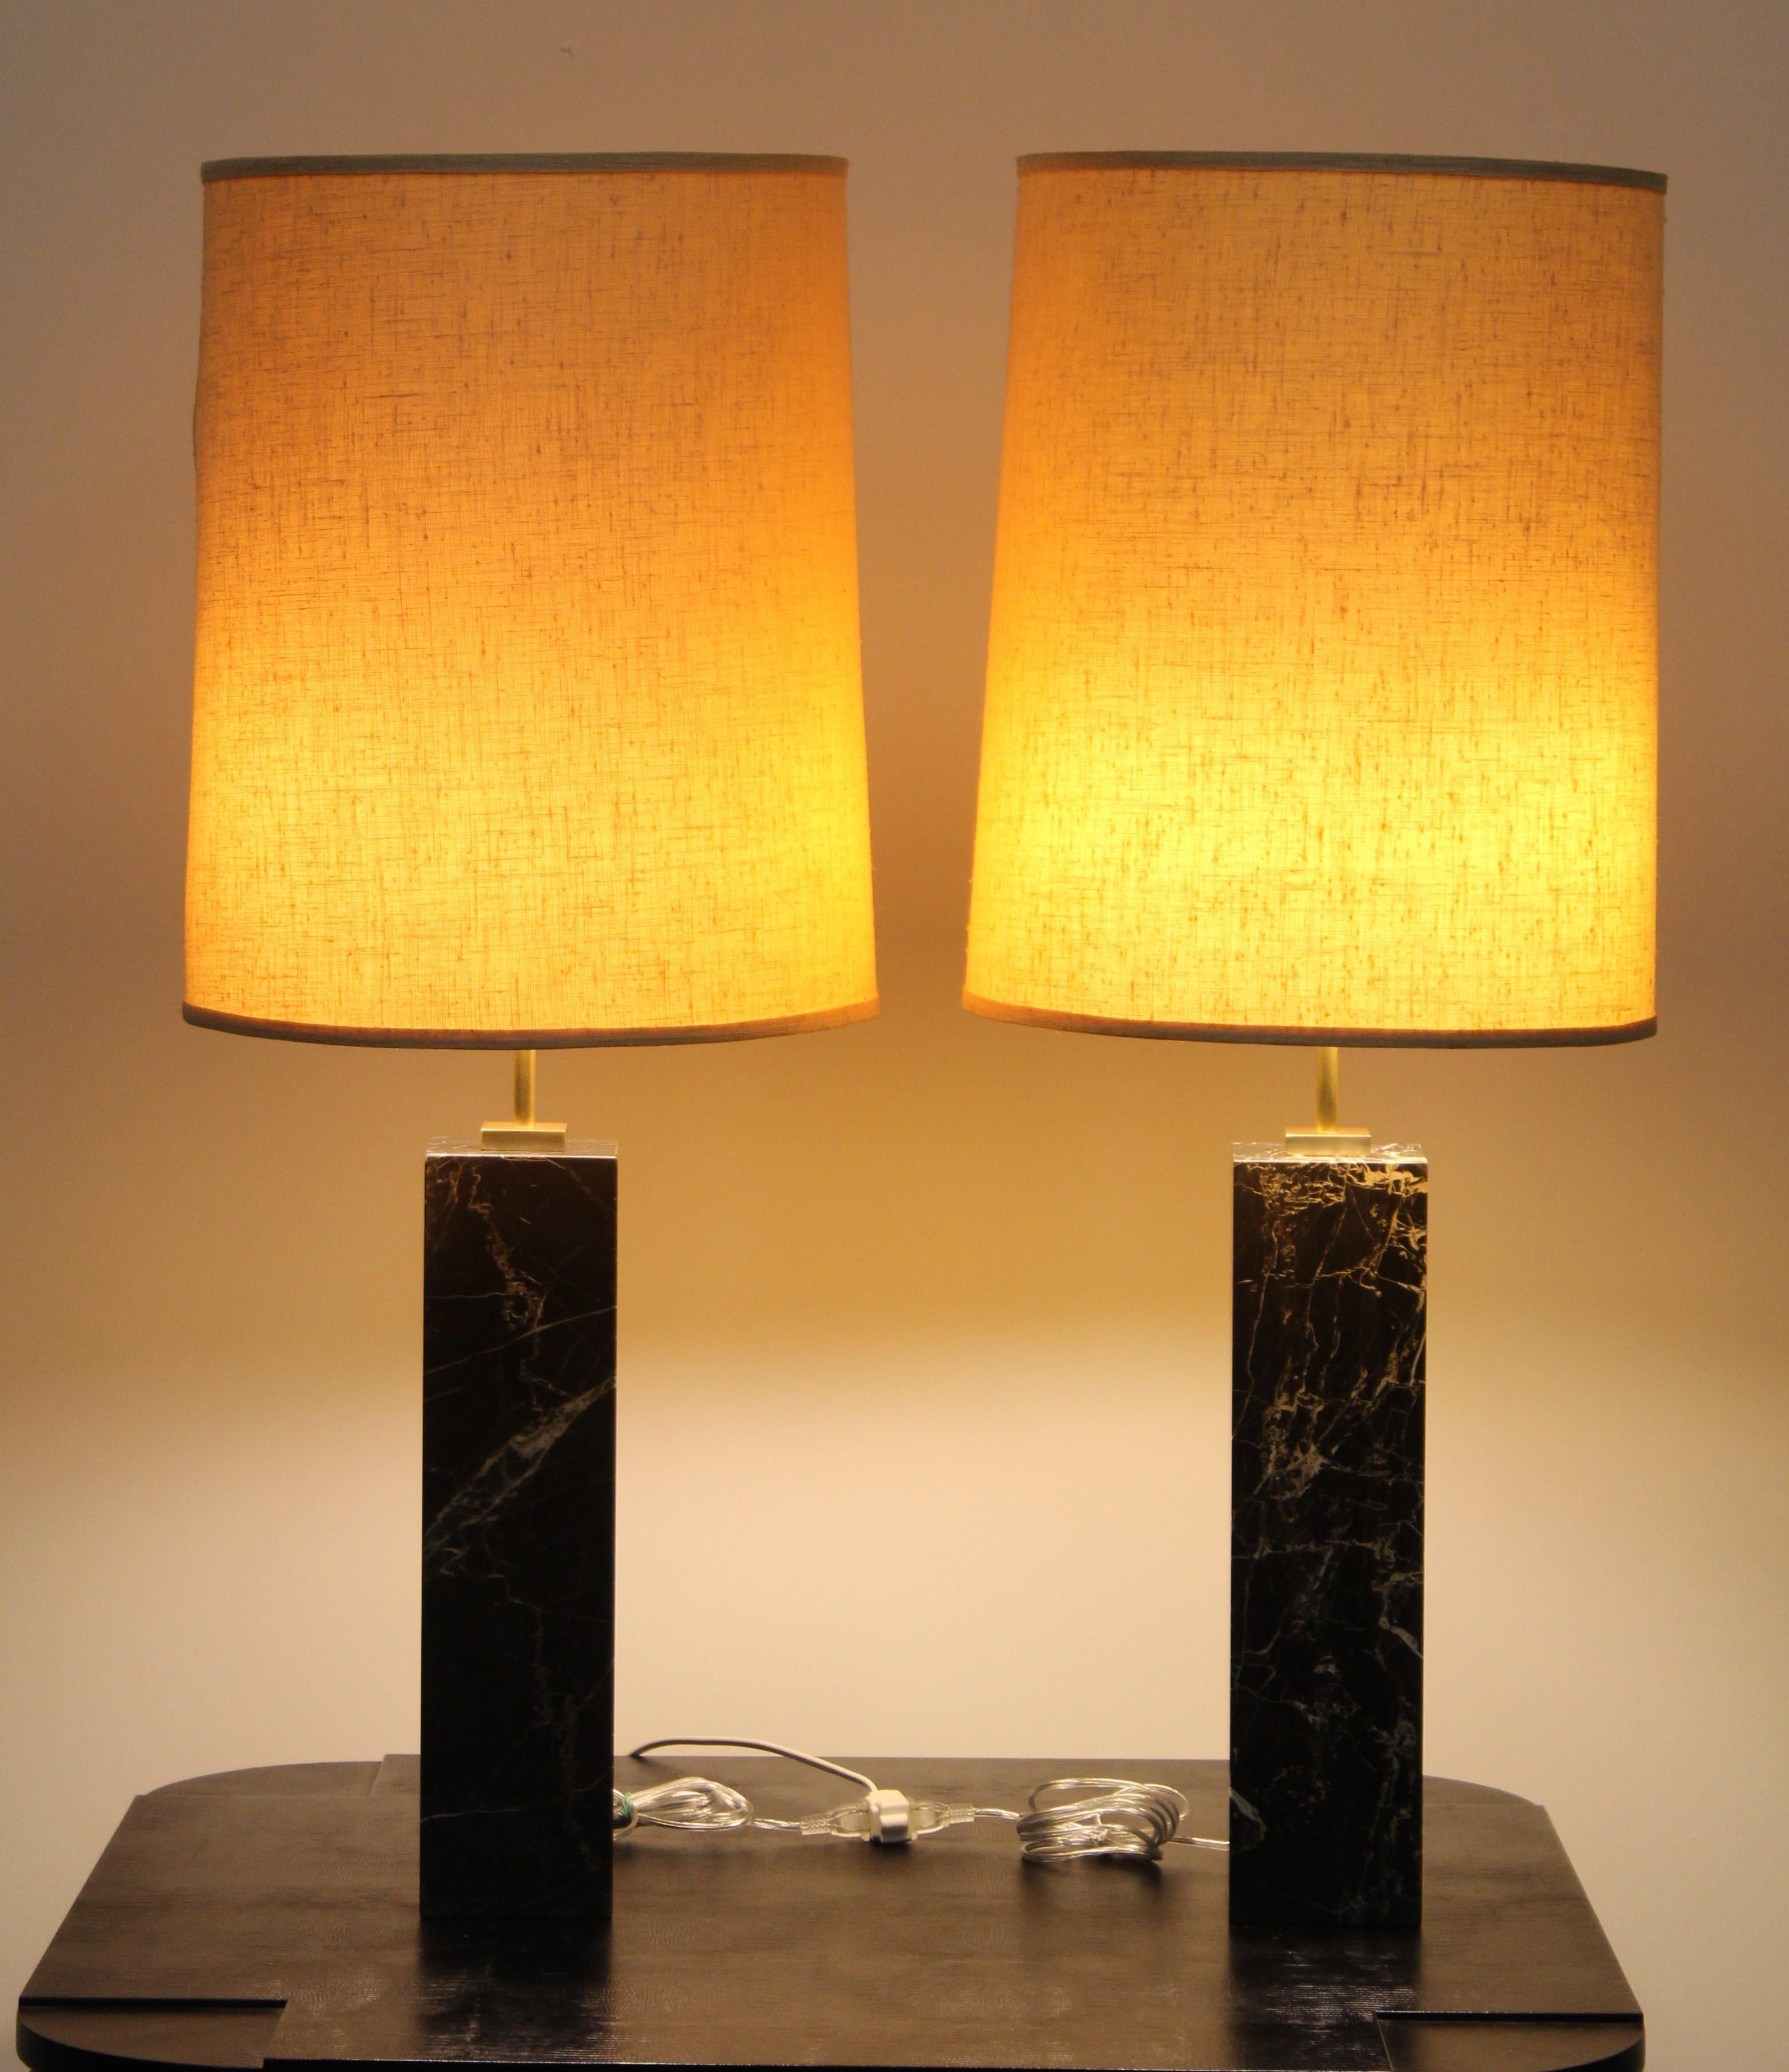 Pair of monumental Robsjohn Gibbings style black marble lamps, 1960s. Newly rewired with high quality brass sockets and hardware. Ready to be placed in your home. 

Lamp shades not included.